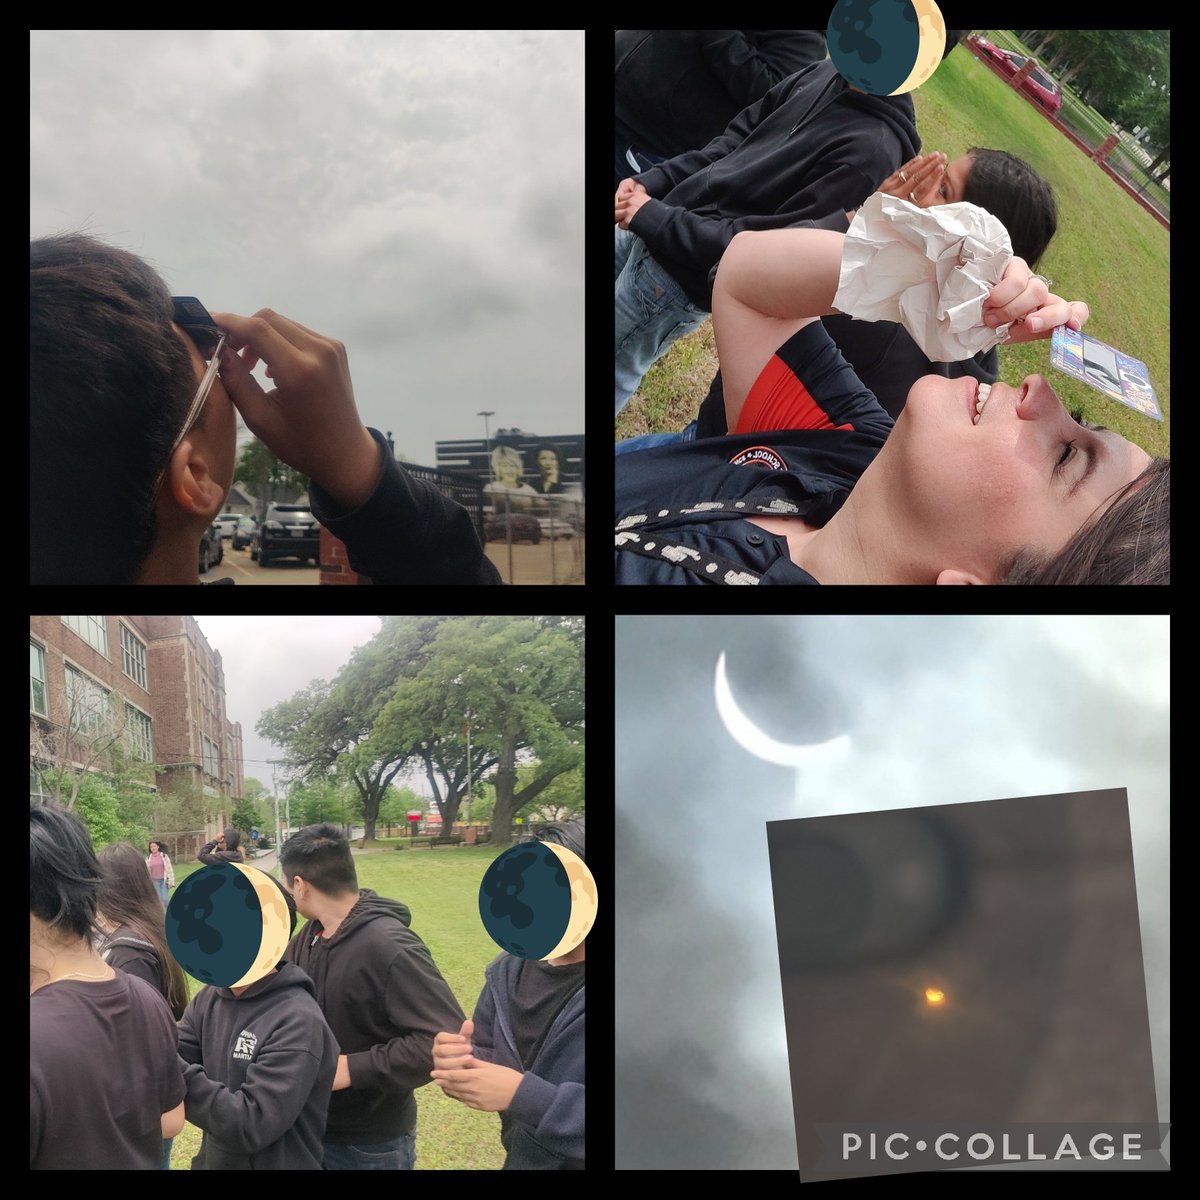 🌥️The clouds parted just enough to see the eclipse.🌑 I'm blessed to share this special event with my students.😊😁 These 10 minutes made our day. Their reactions were priceless. 🧡🐆🖤